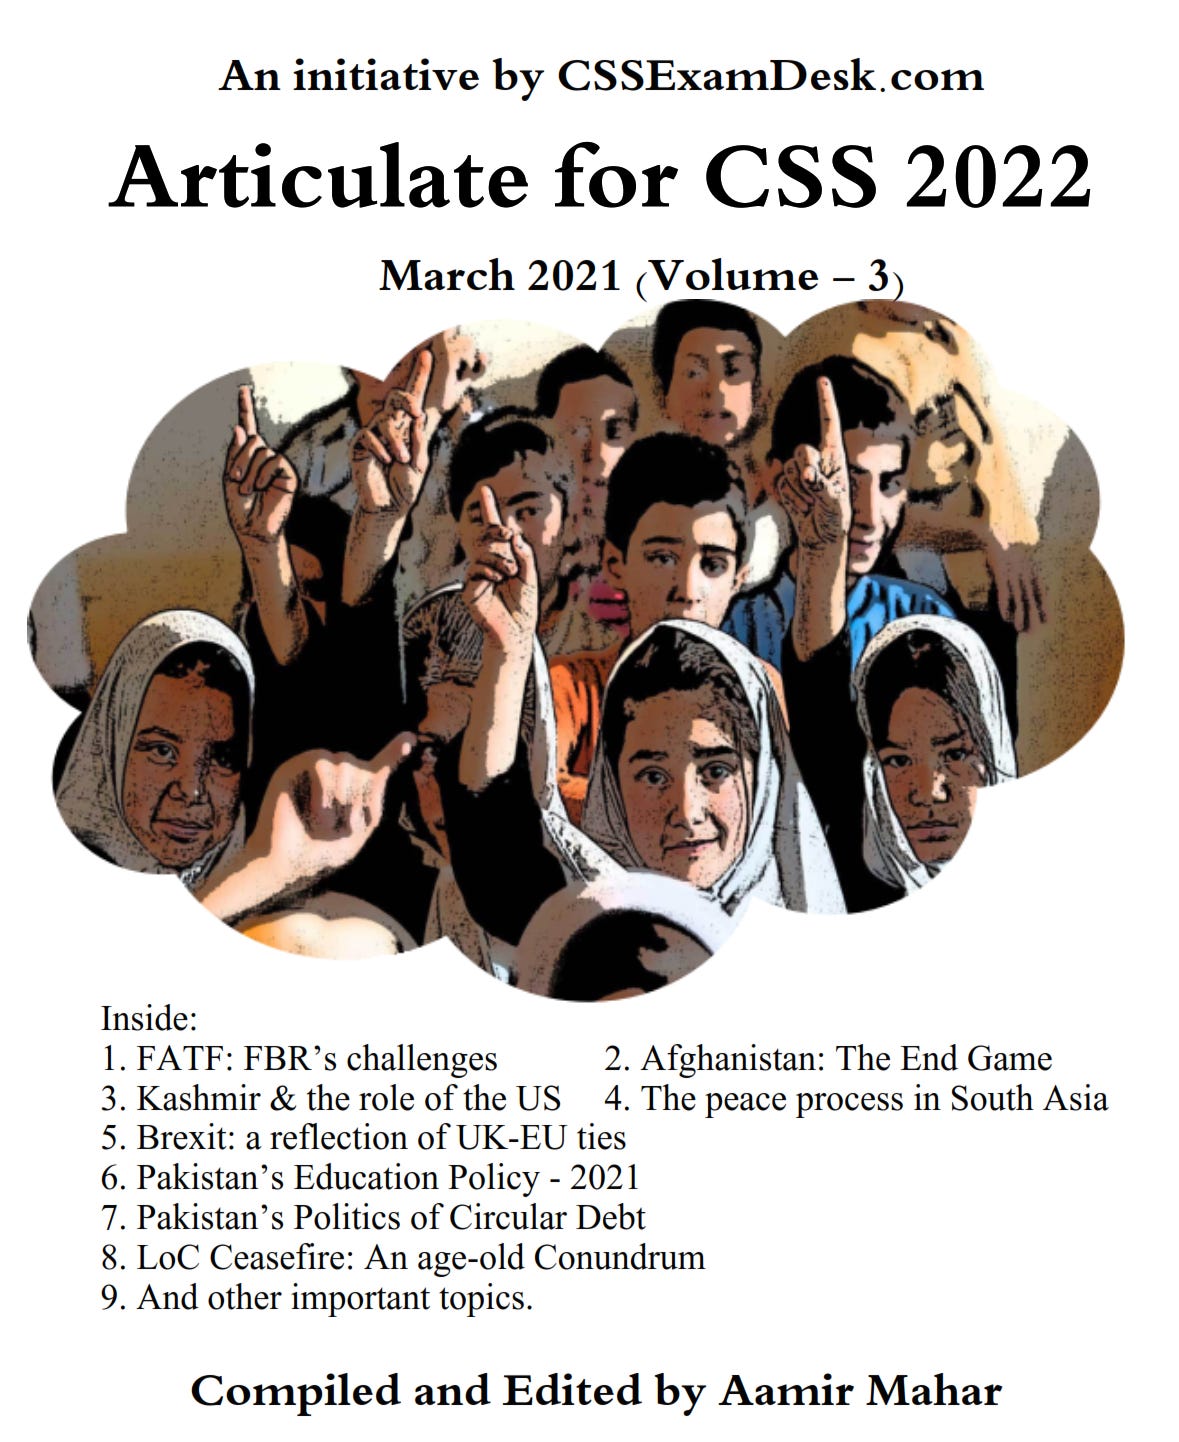 Rapid CSS 2022 17.7.0.248 download the last version for apple